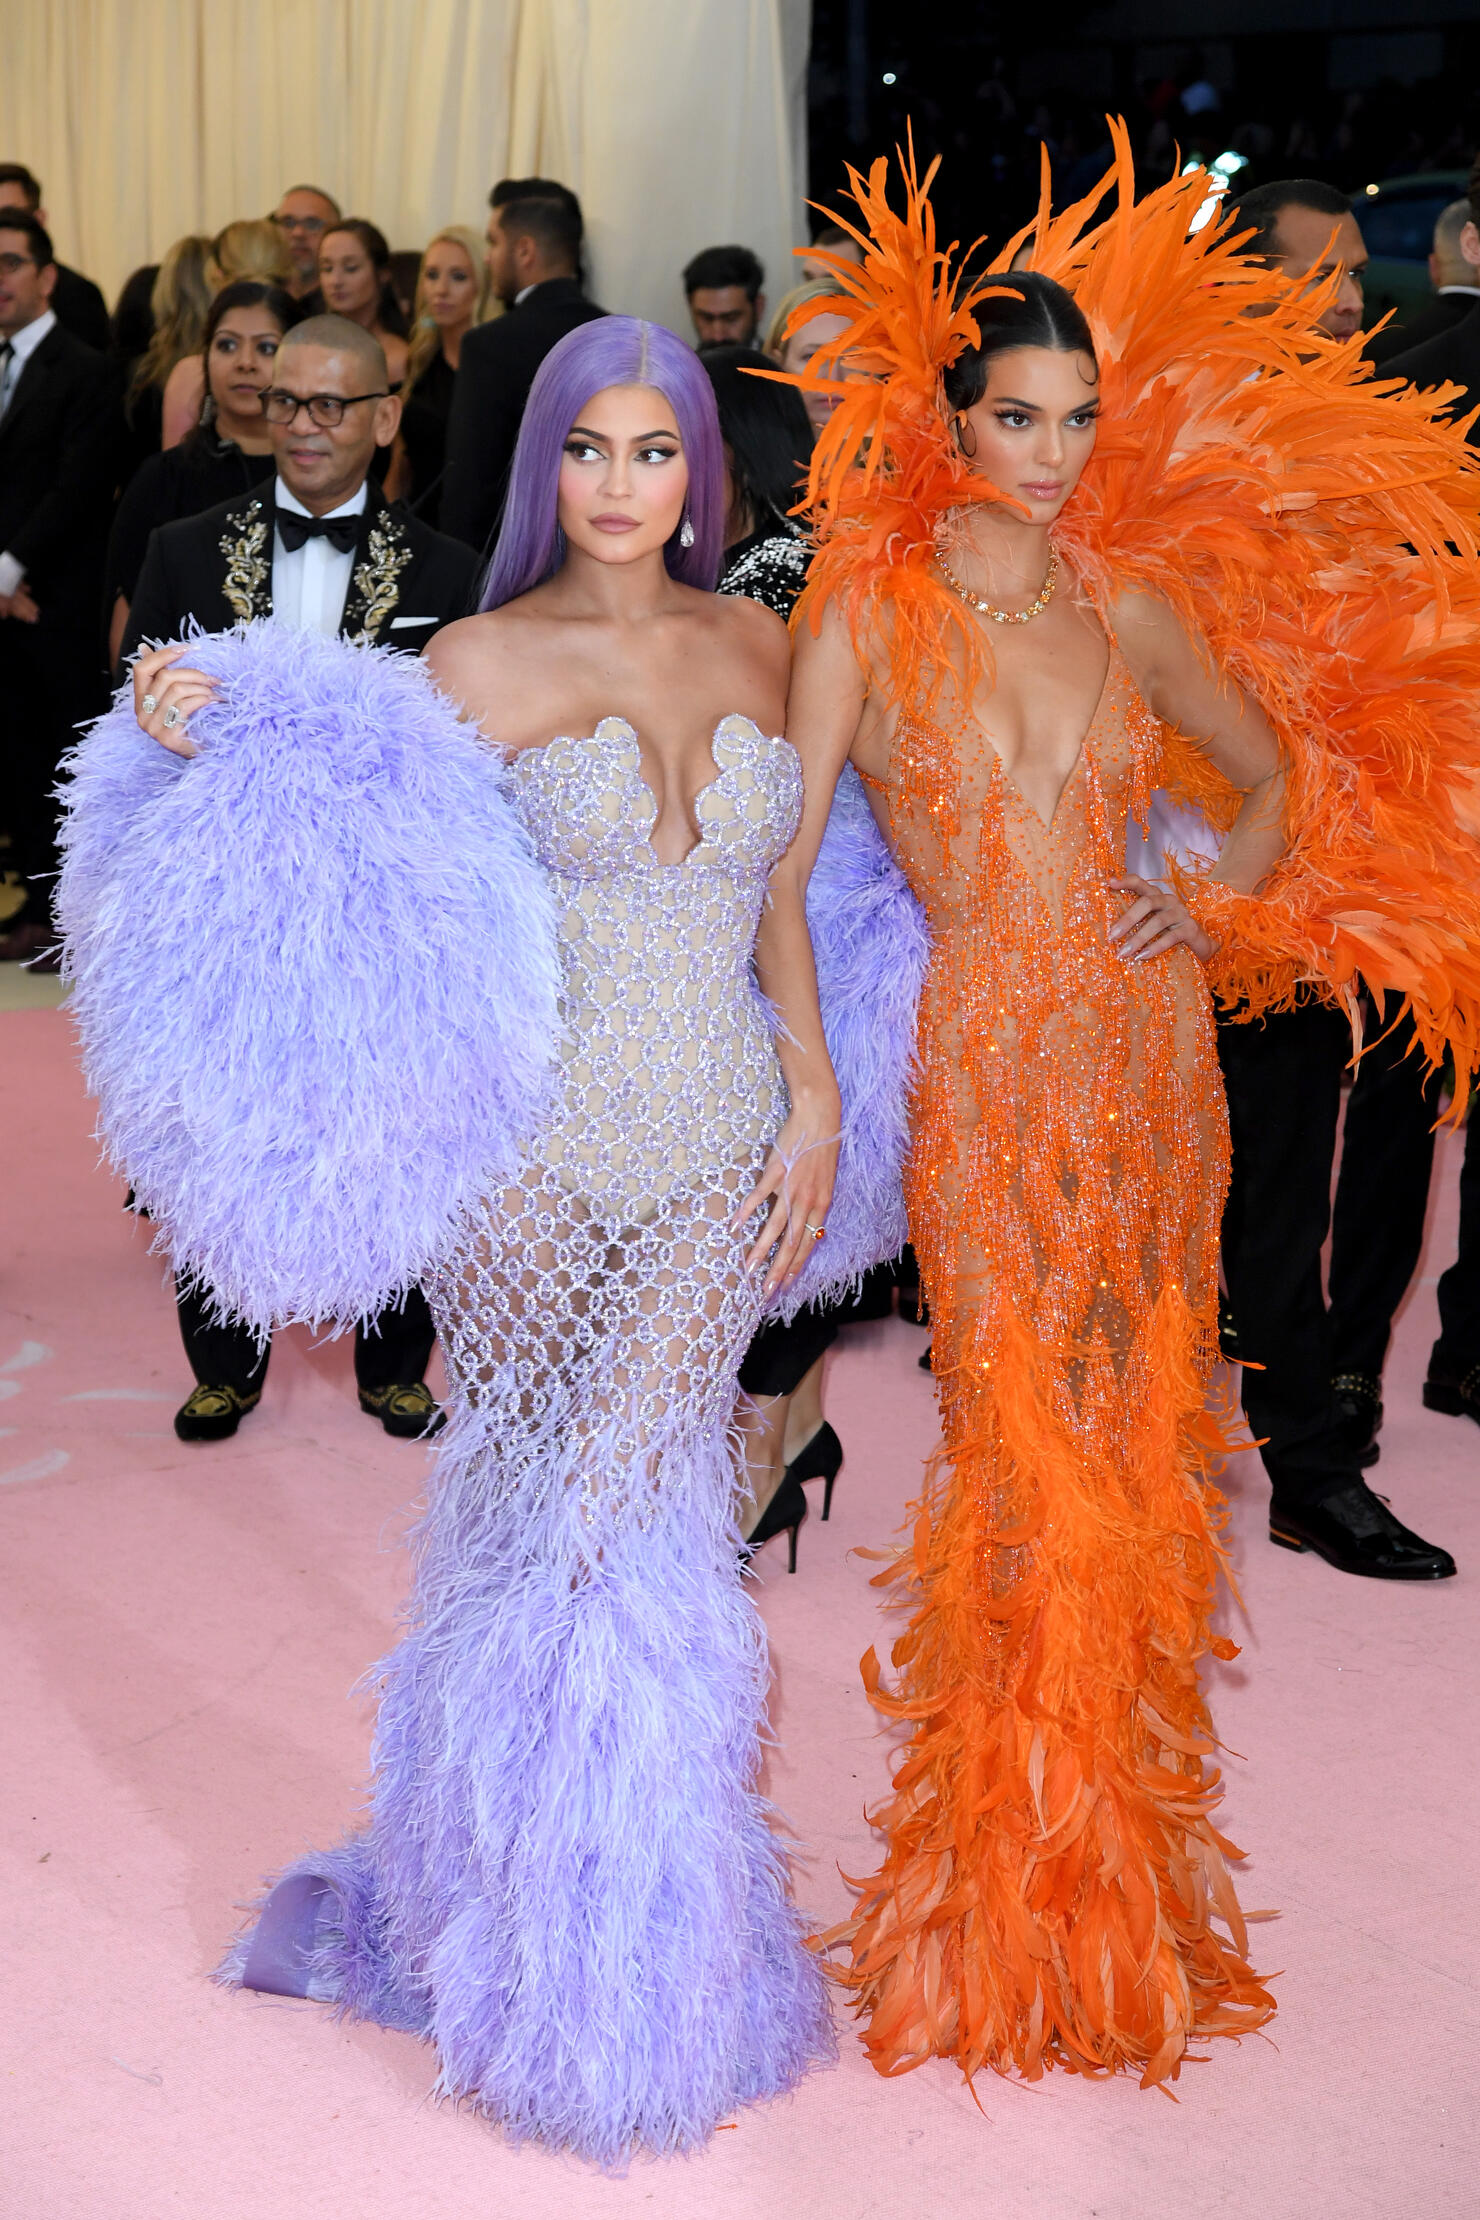 The Kar-Jenners Owned The 2019 Met Gala — See Their Red Carpet